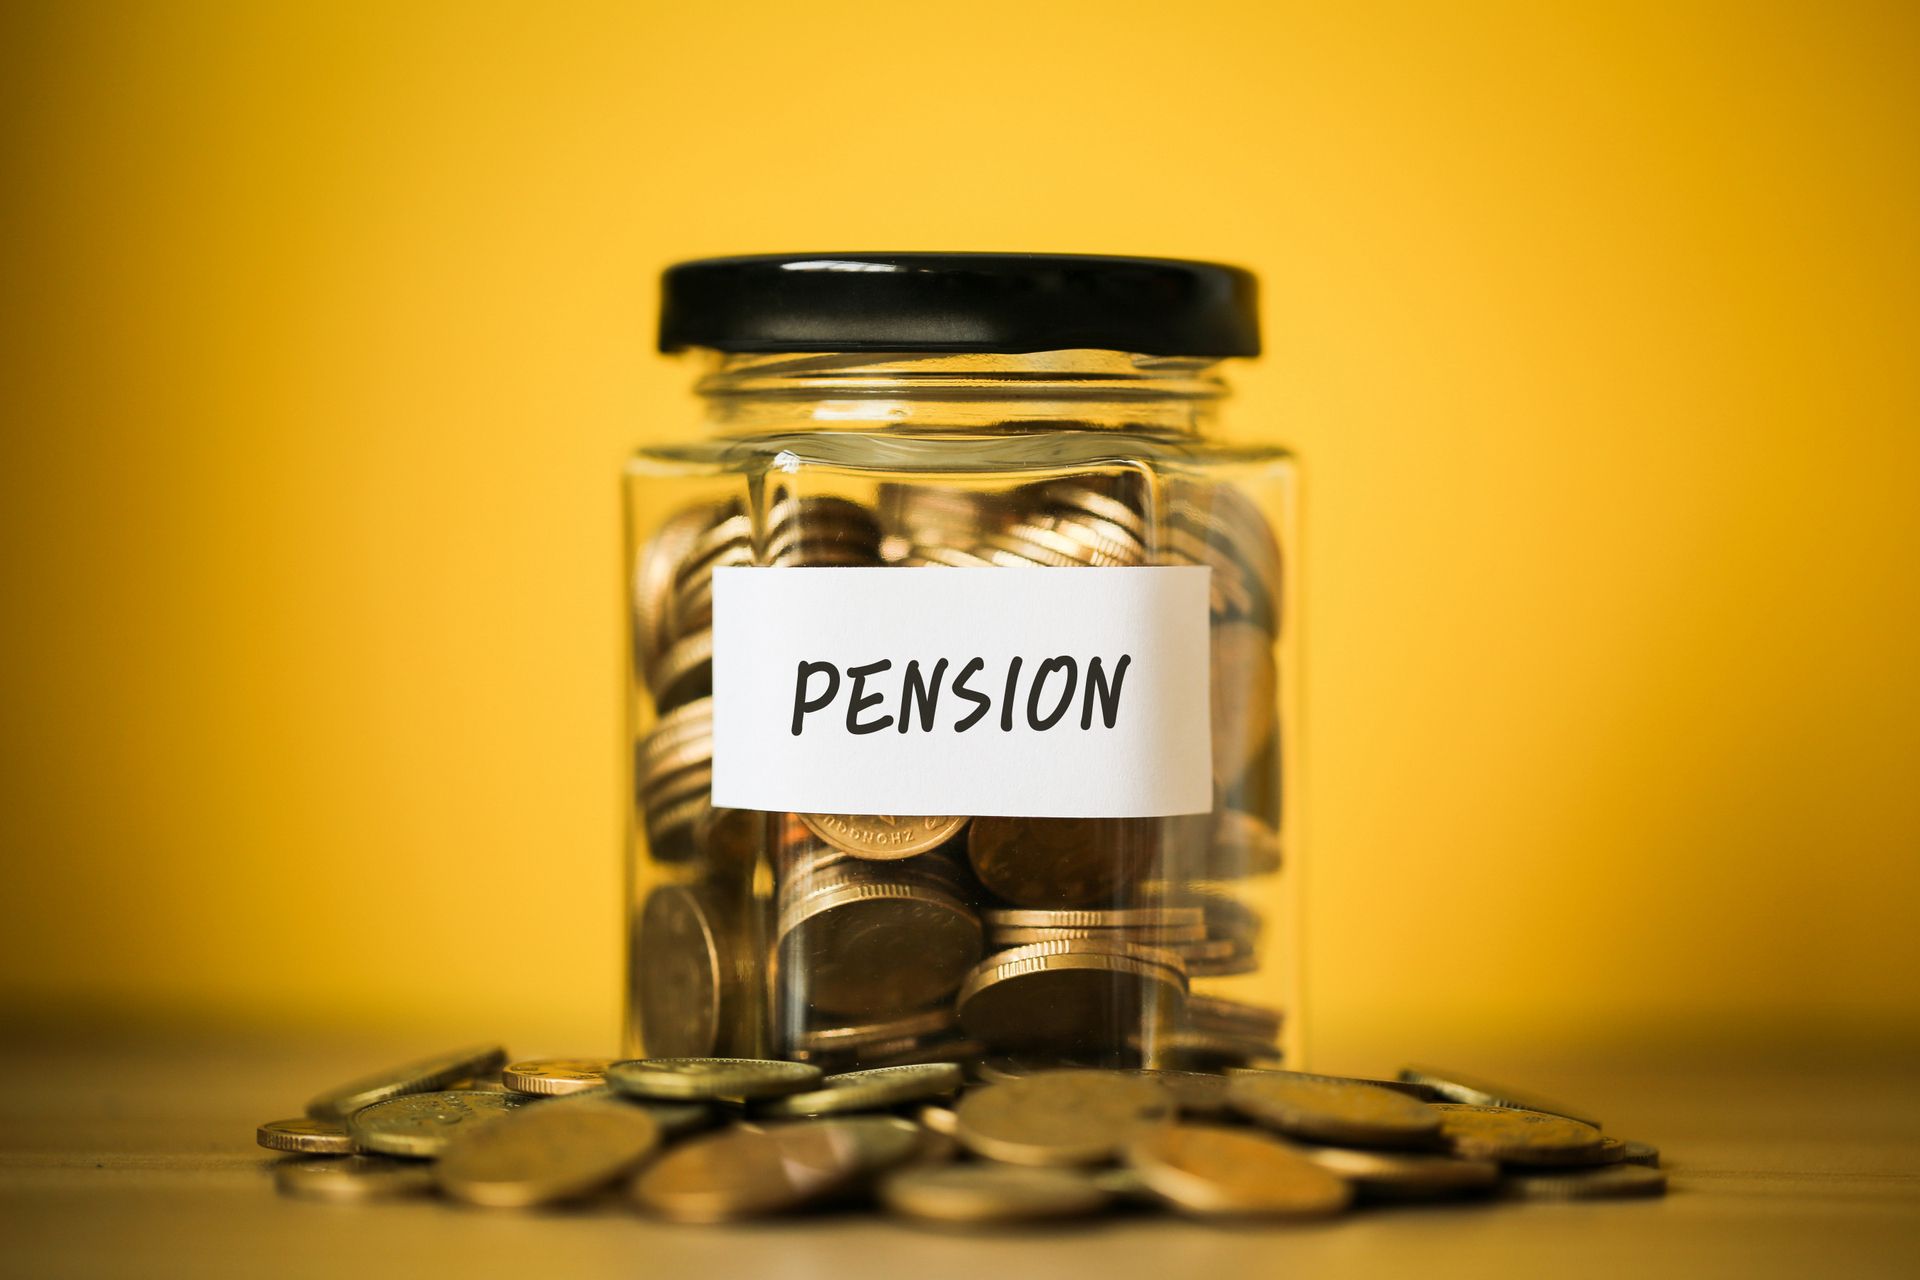 Pension jar - Independent Financial Planning – Stonehouse